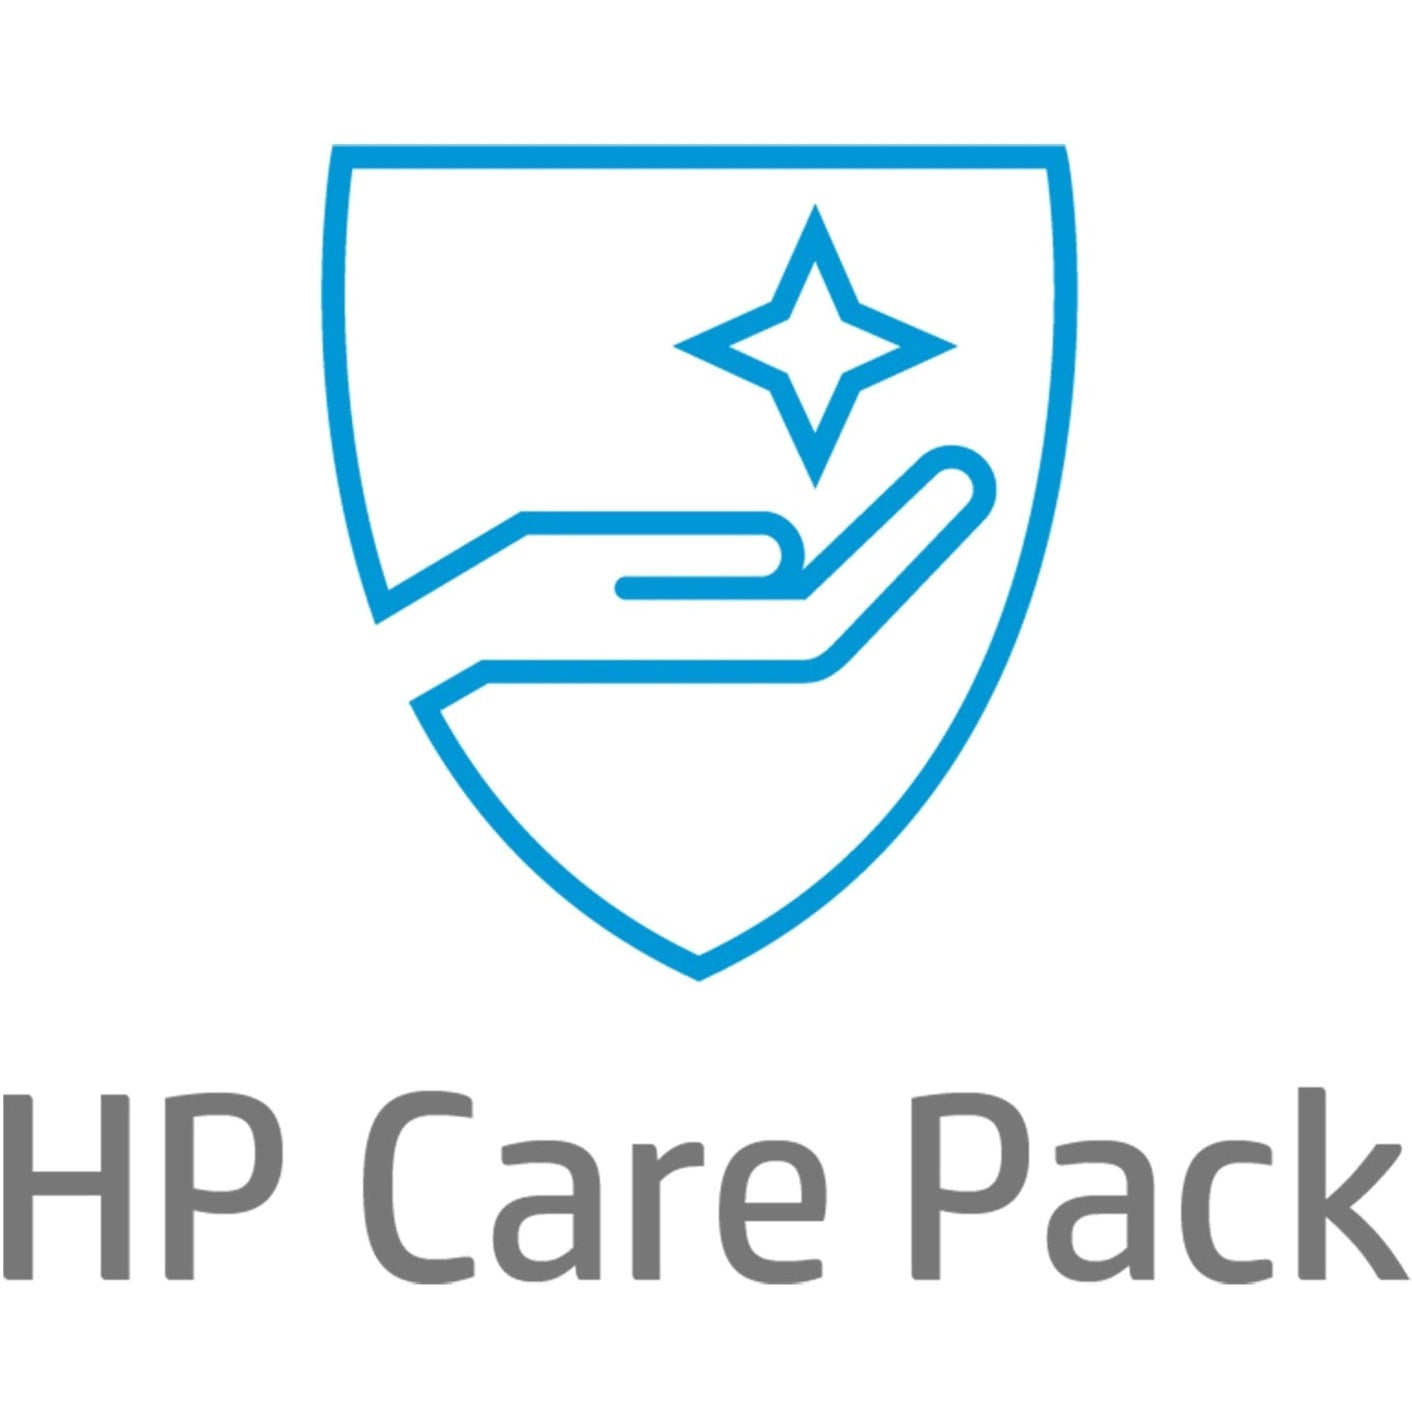 HP Care Pack Hardware Support with Defective Media Retention - 4 Year - Warranty (U9NE4E)